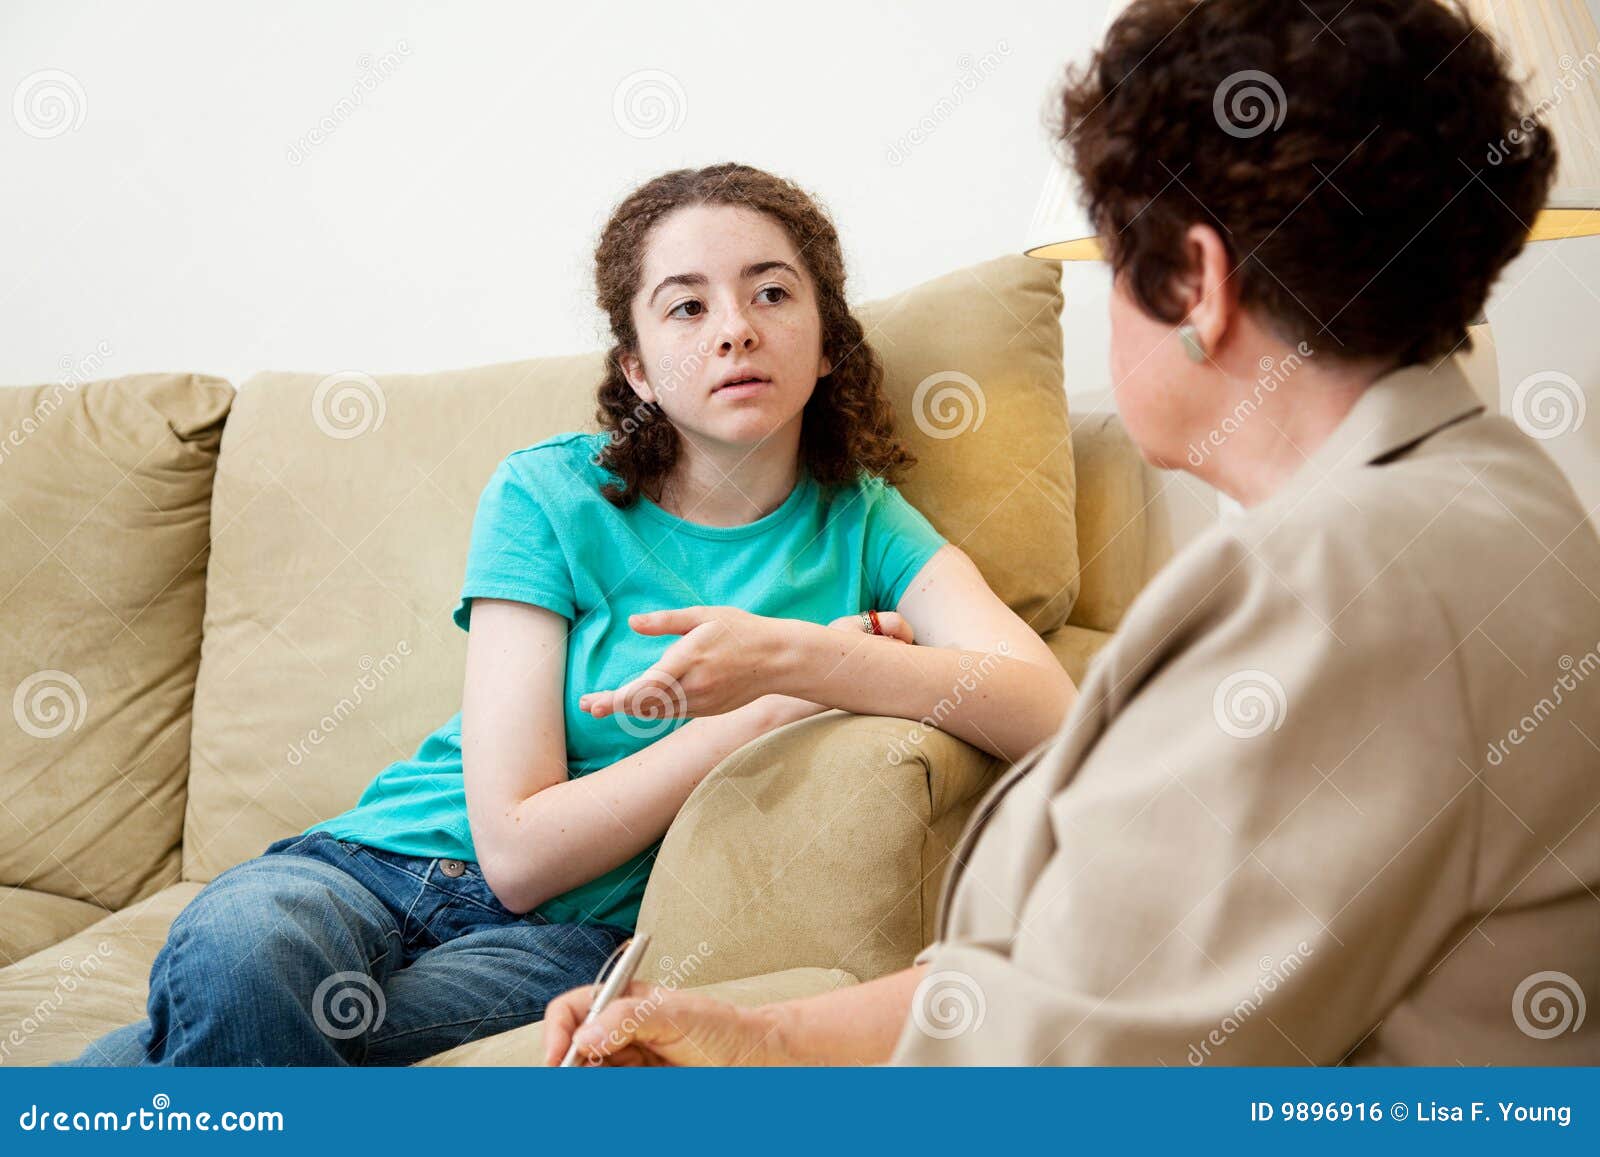 teen speaking with counselor